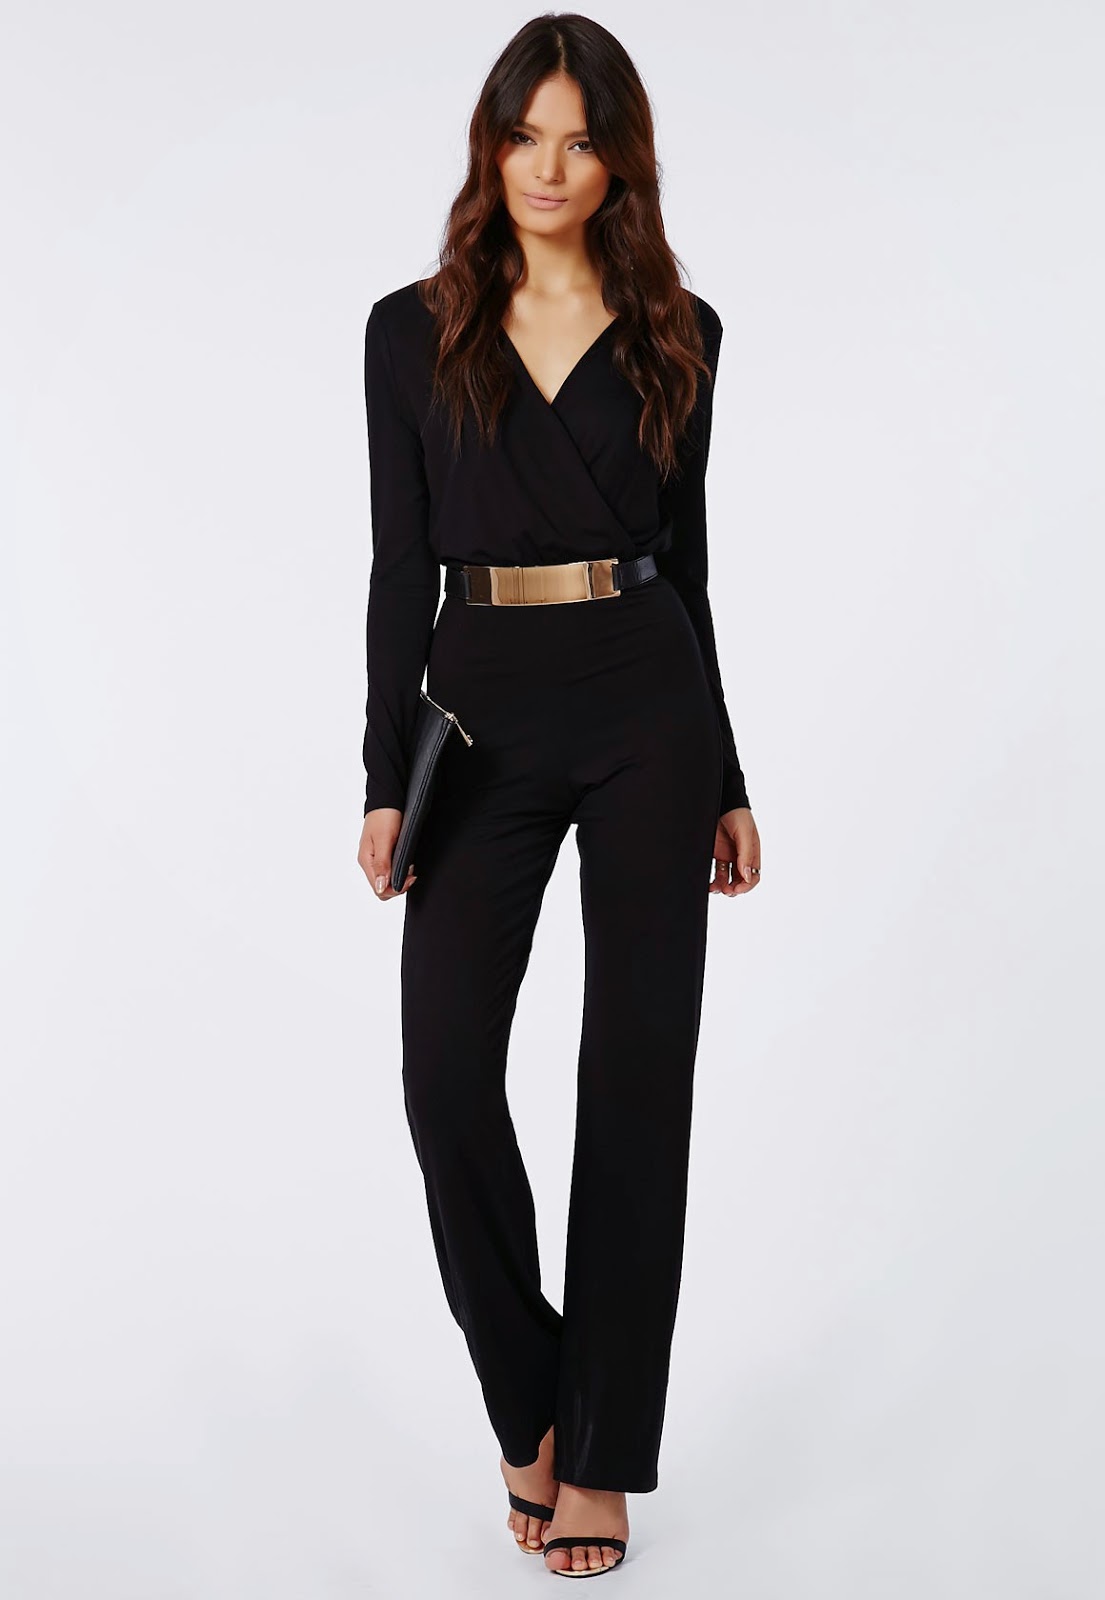 Lust of the week: Missguided wide leg jumpsuit | Style Trunk